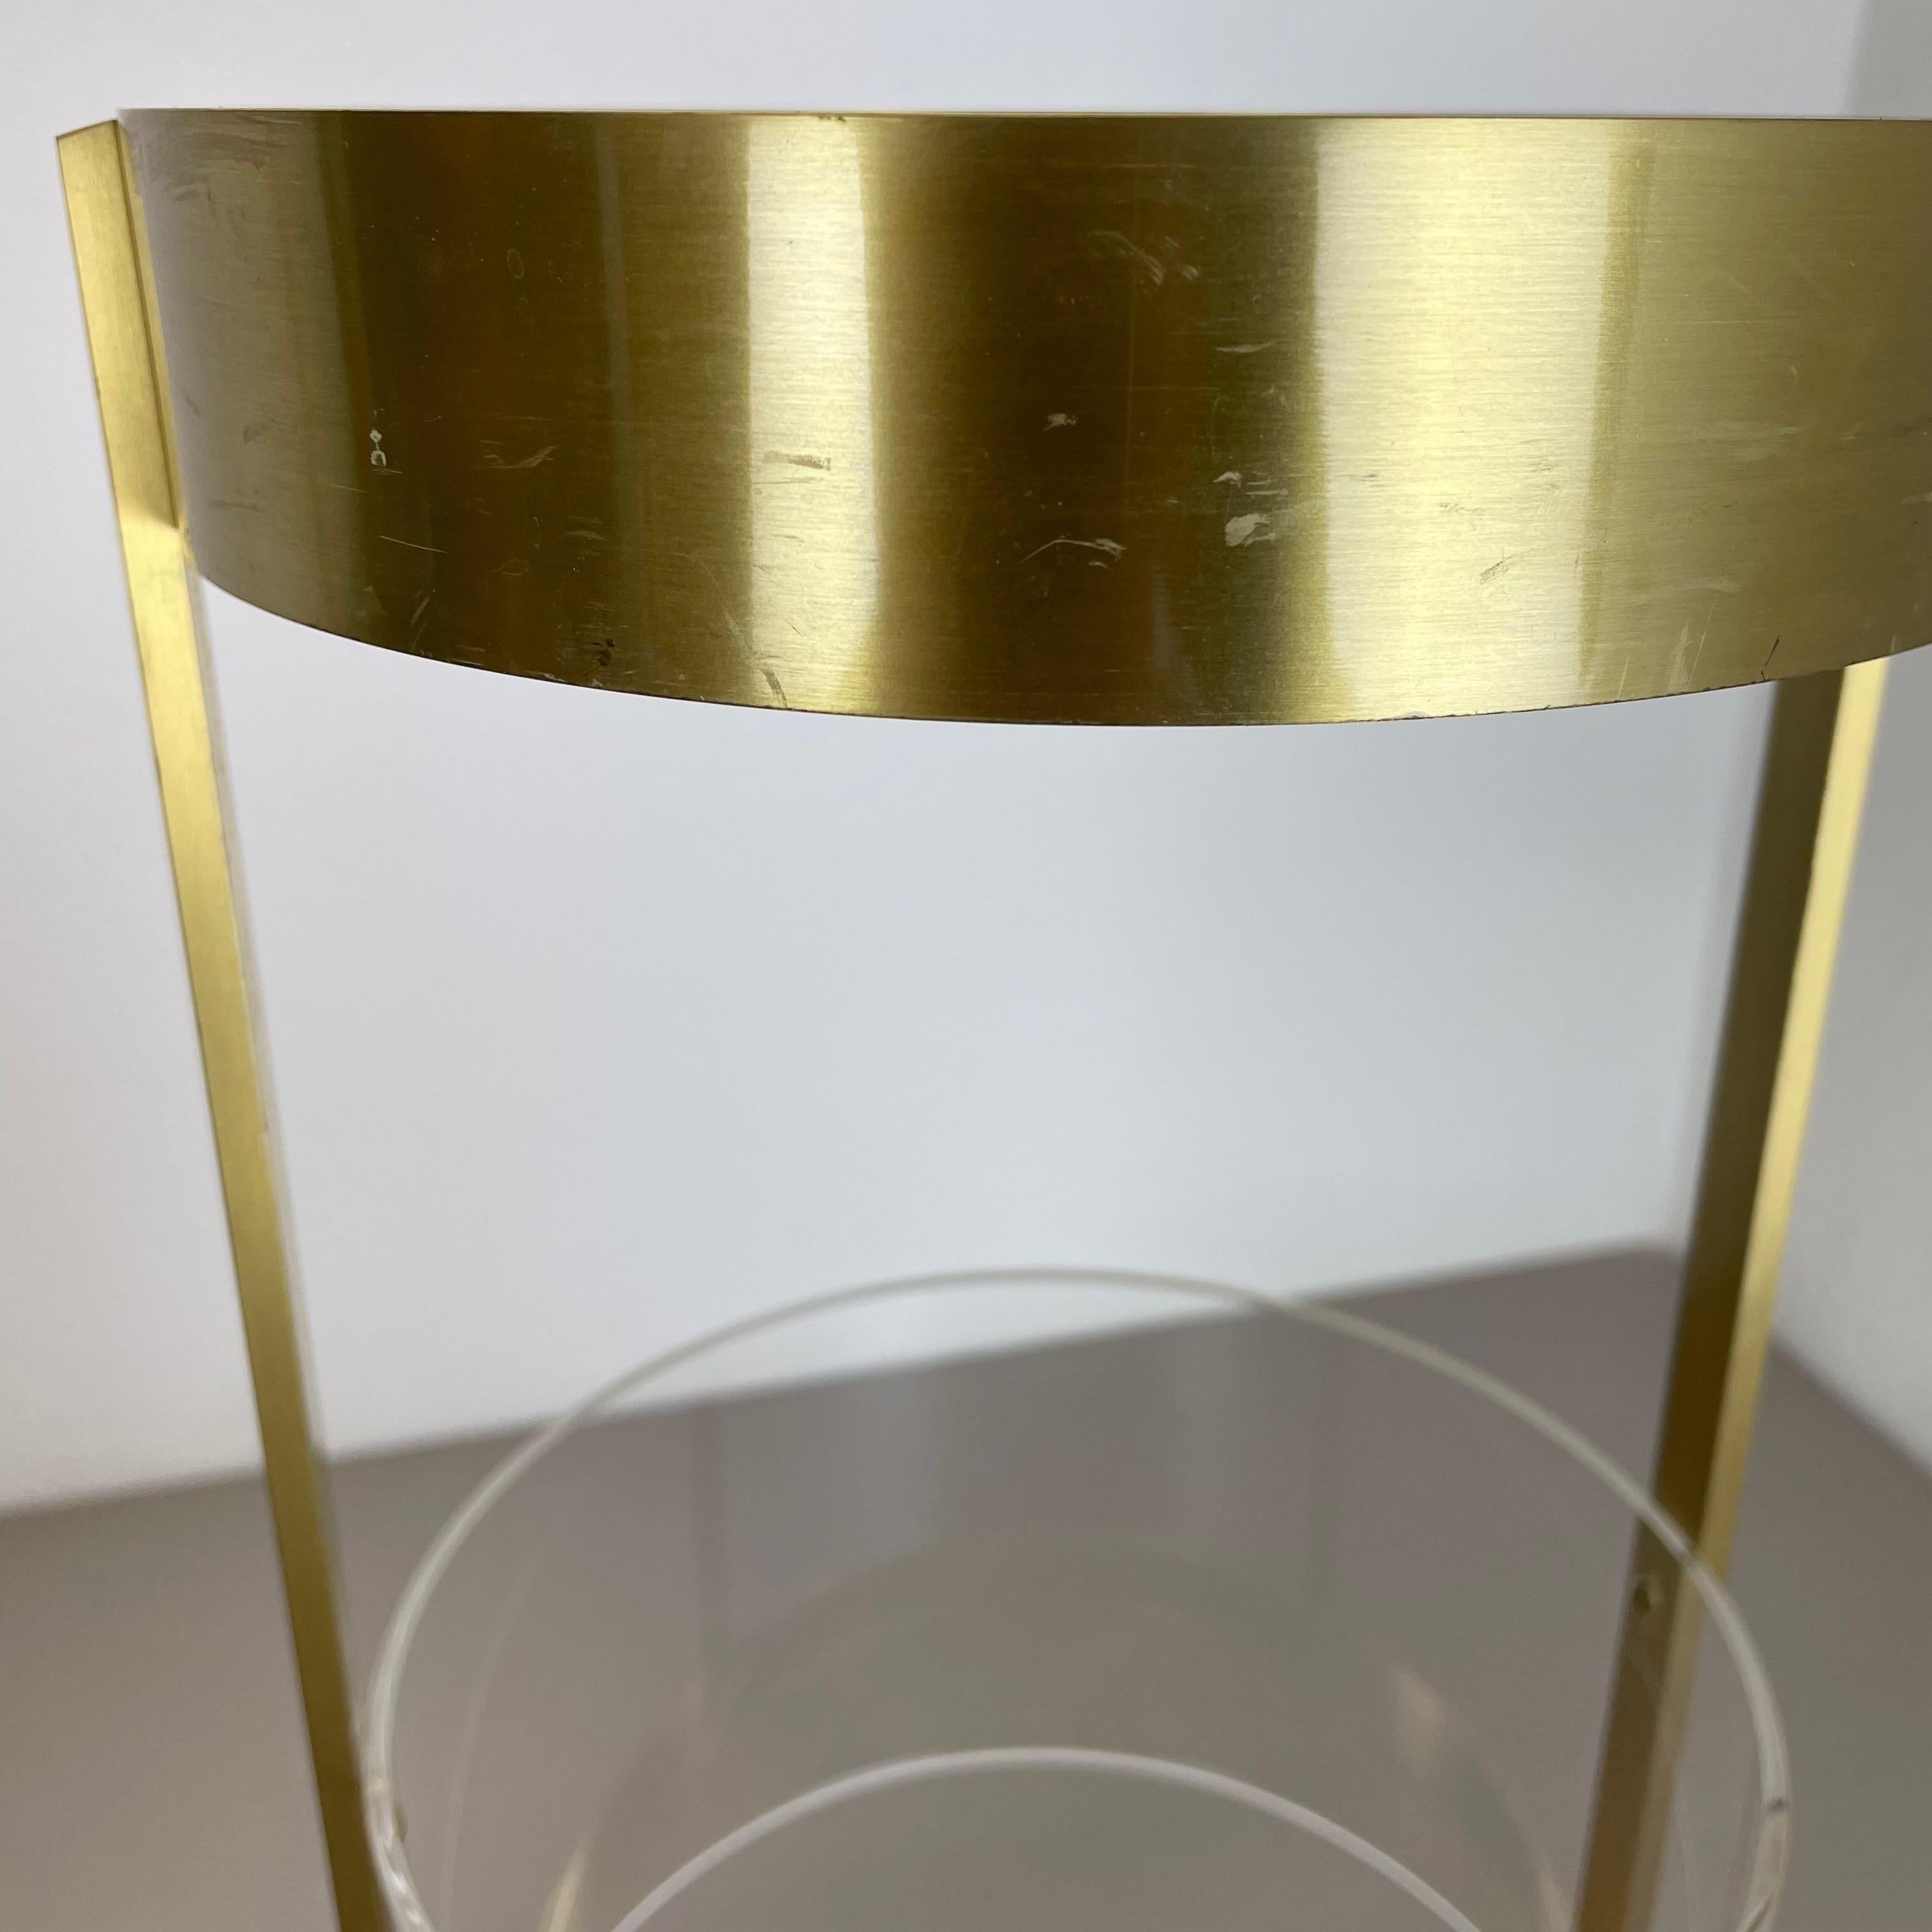 Original Hollywood Regency Solid Brass Acryl Glass Umbrella Stand, Italy, 1970s For Sale 3